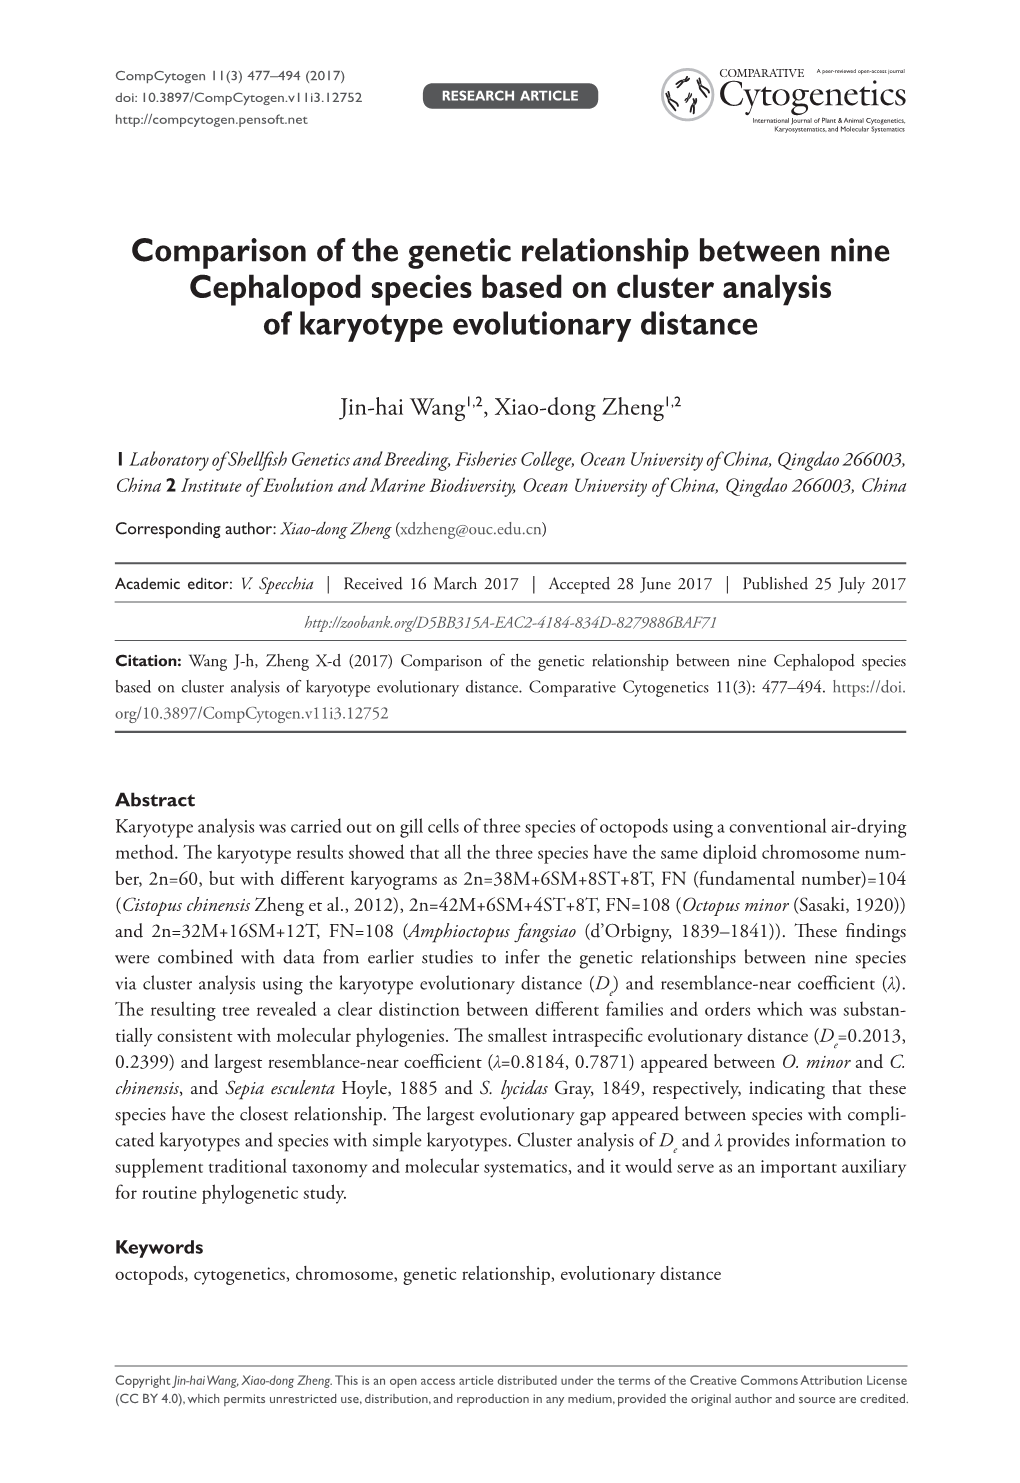 Comparison of the Genetic Relationship Between Nine Cephalopod Species Based on Cluster Analysis of Karyotype Evolutionary Distance